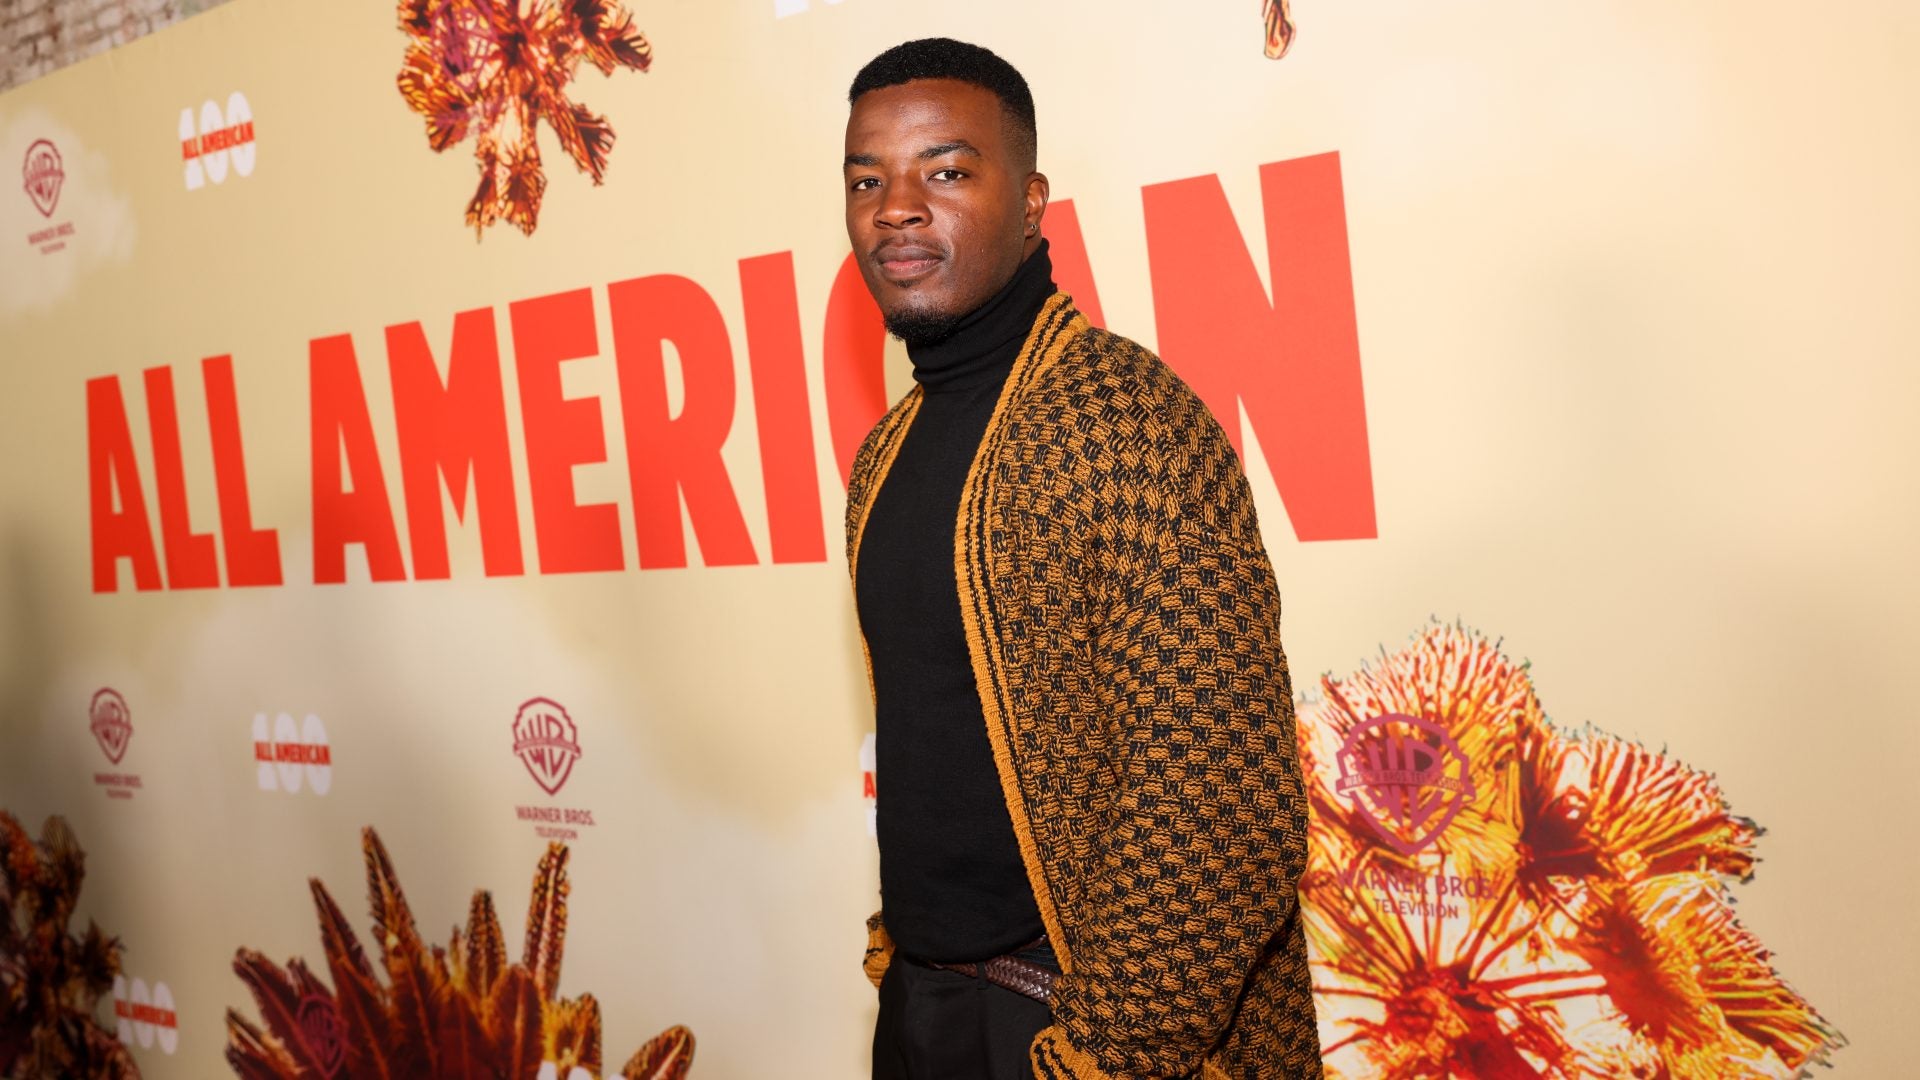 ‘All American’ Celebrates 100 Episodes And Creates A New Lane For Black Stories